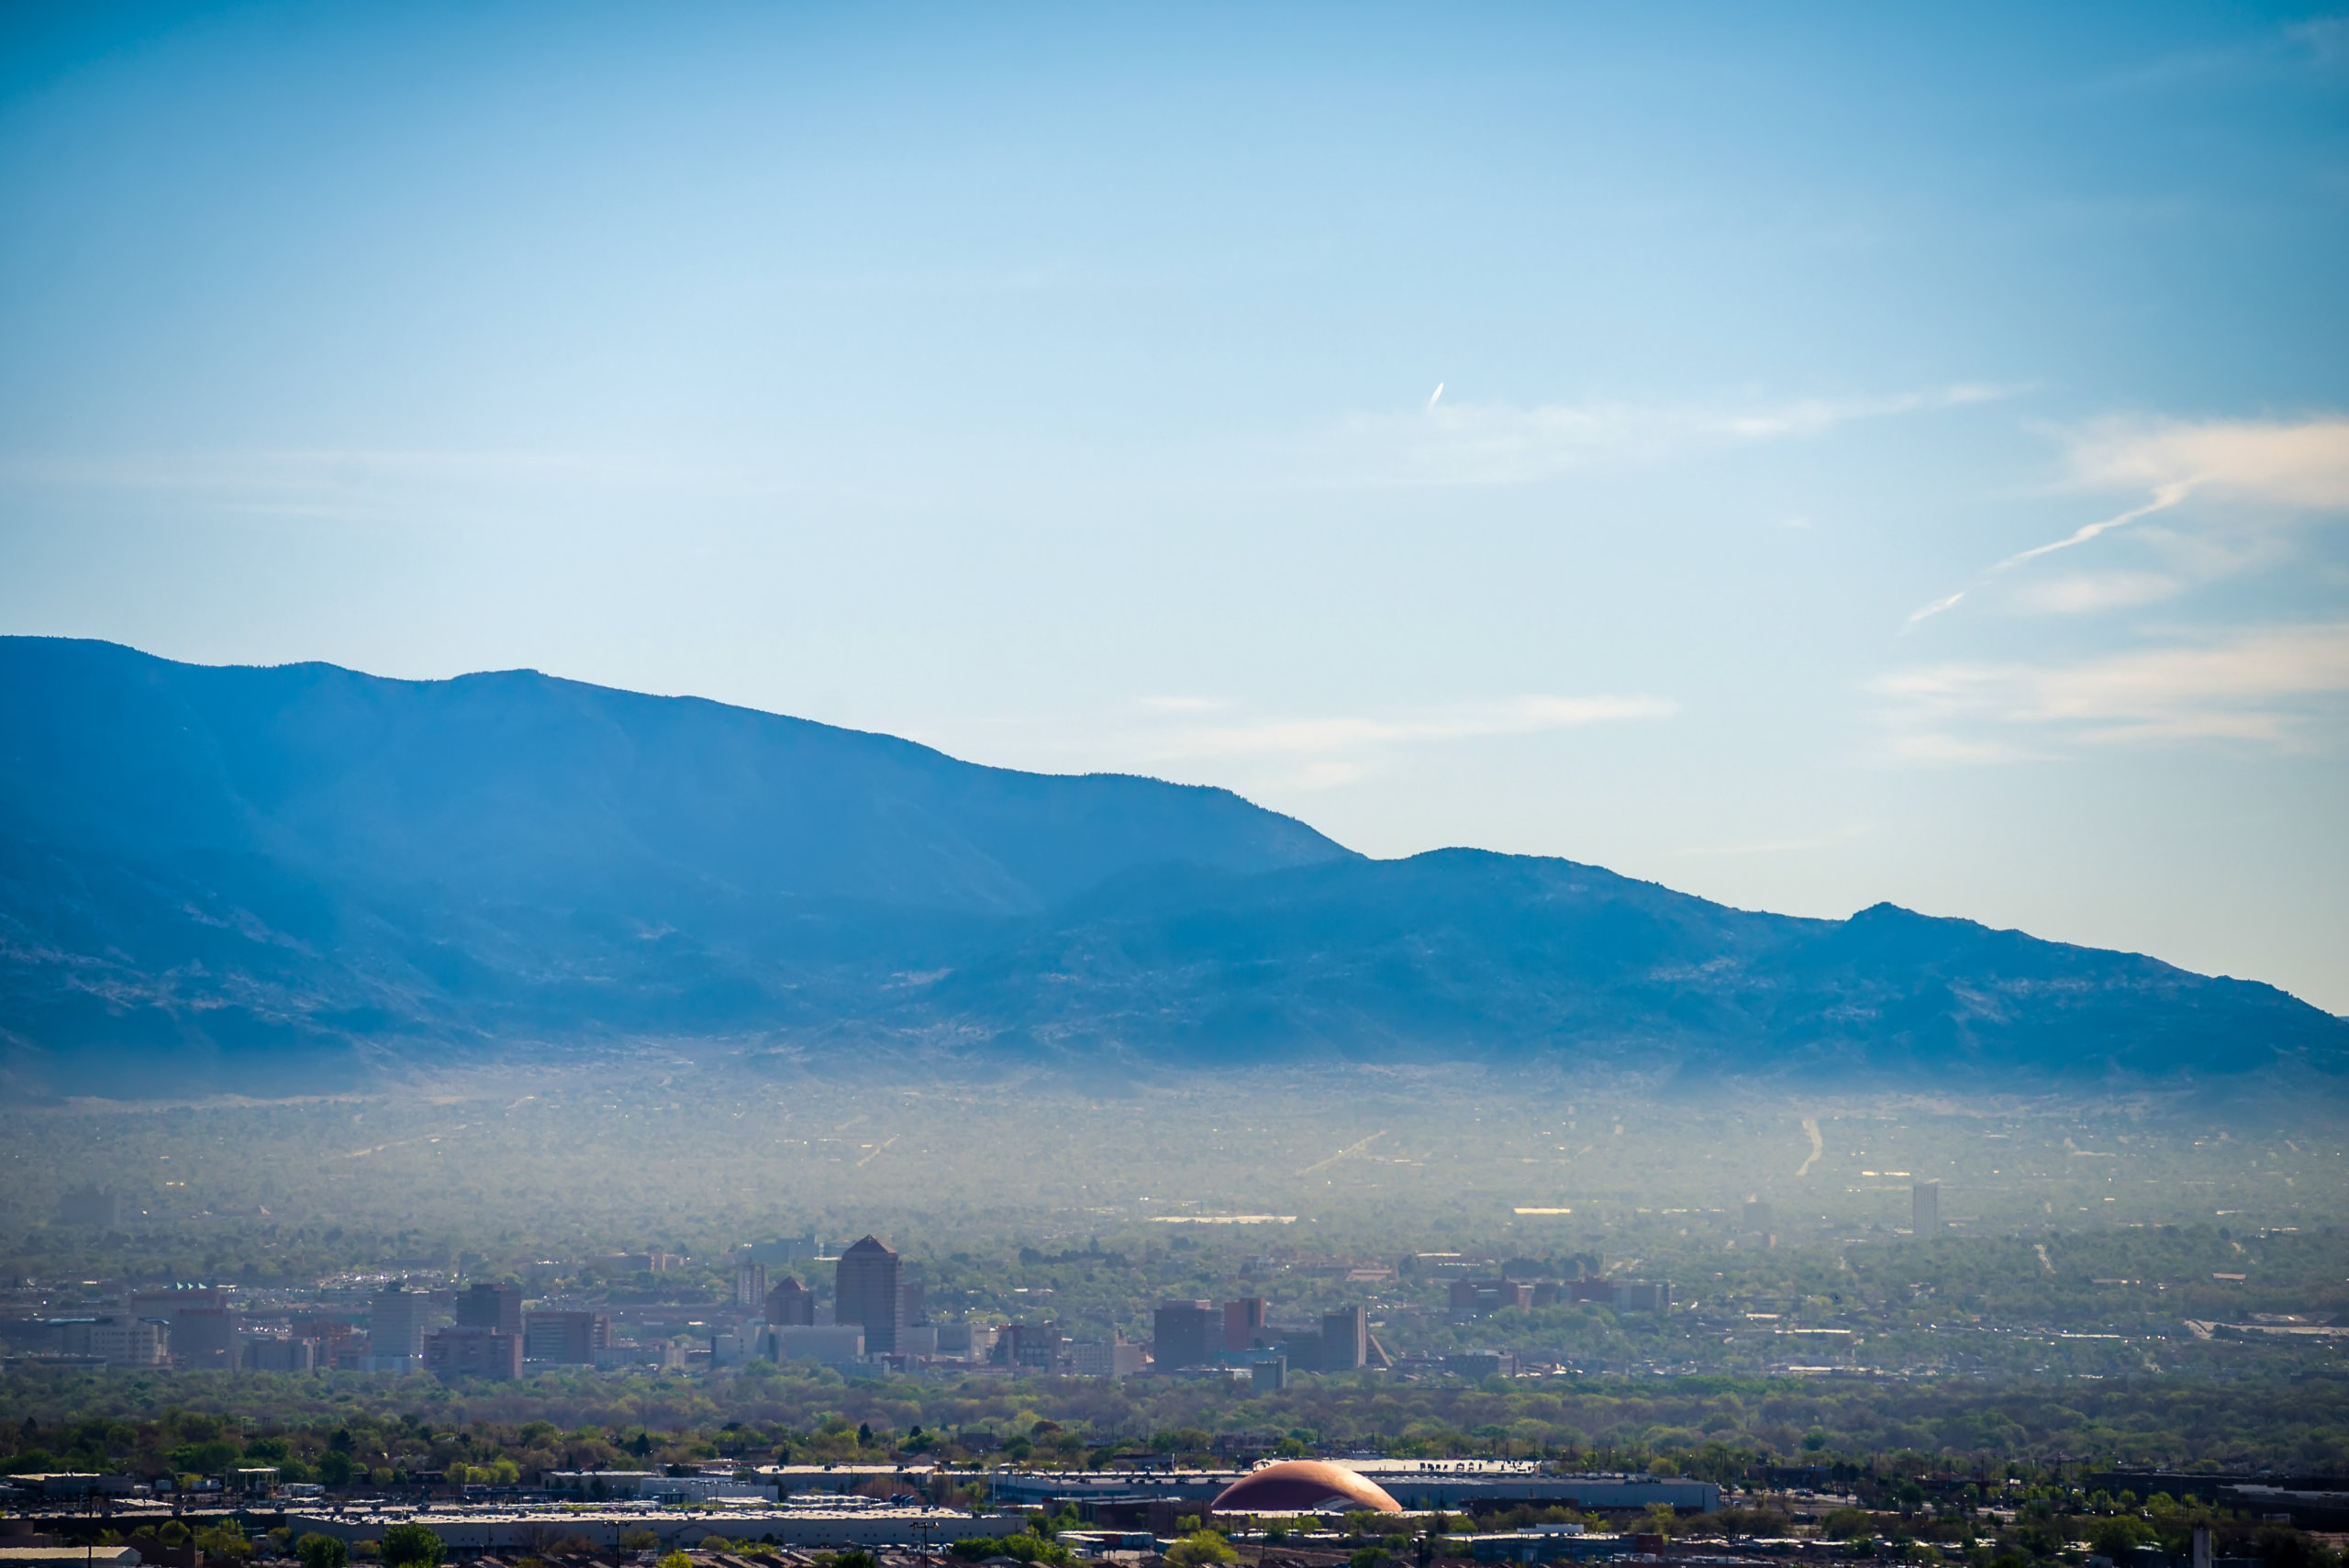 Albuquerque’s air quality has worsened, according to new State of the Air report